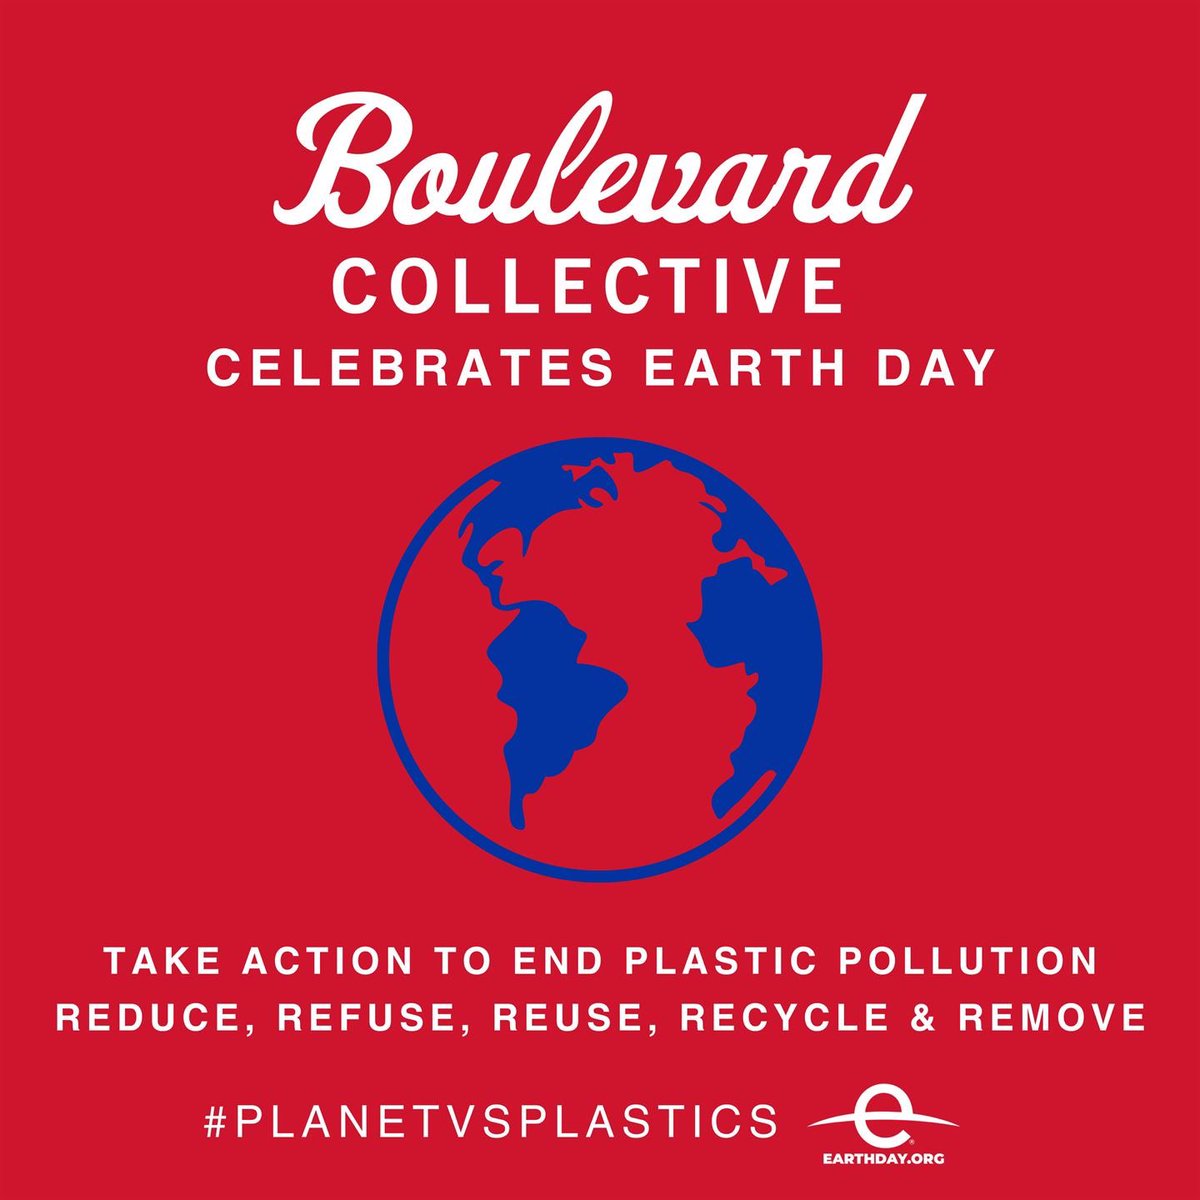 l’m proud to support Earth Day on April 22nd. Join the movement and explore ways to take action with @TheBoulevardNIL & @SMUFB @EarthDay